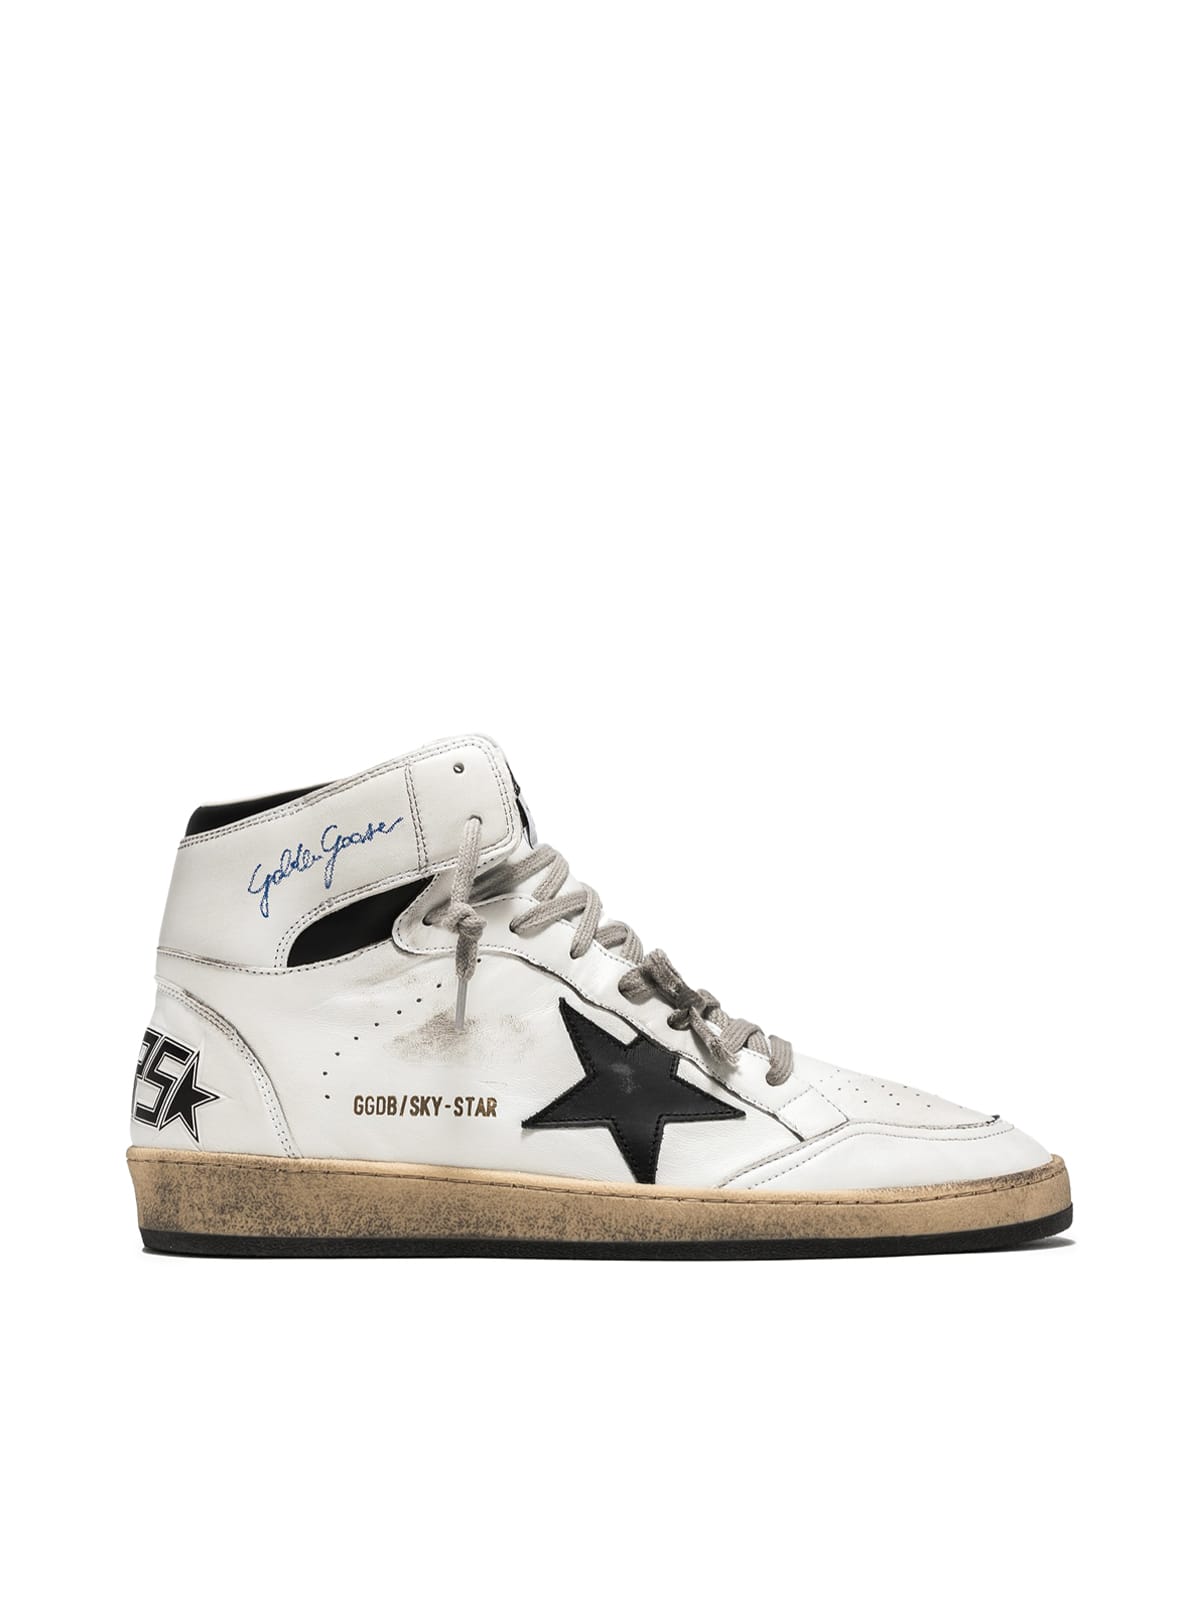 Golden Goose Sky Star Nappa Upper With Serigraph Leather Star And Ankle